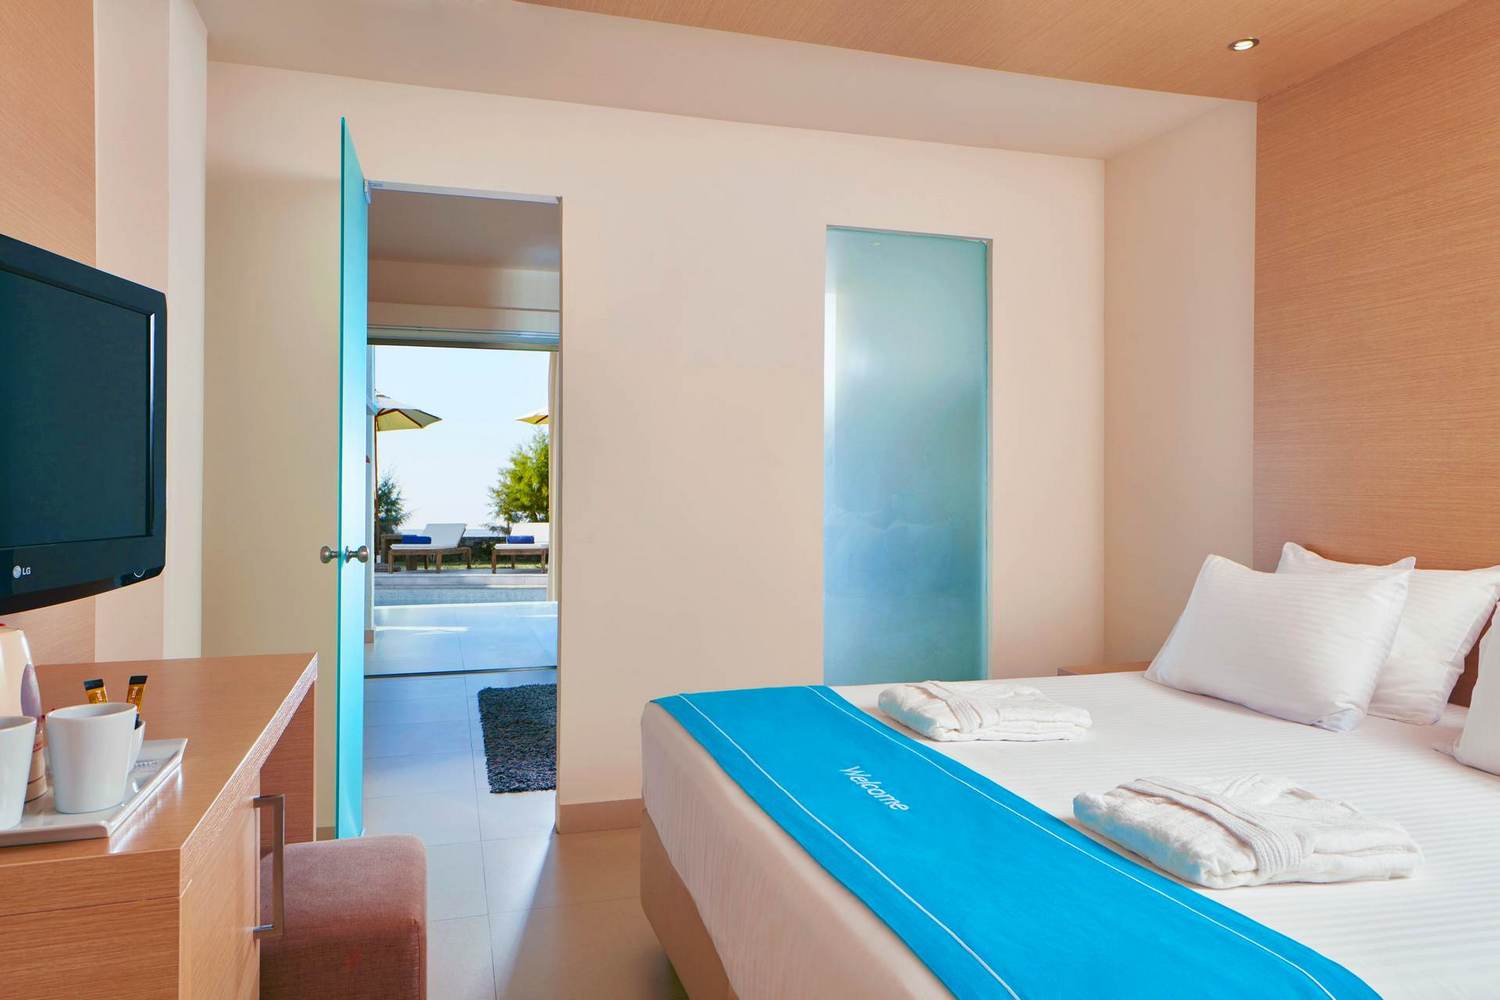 Island Hotel king size beds